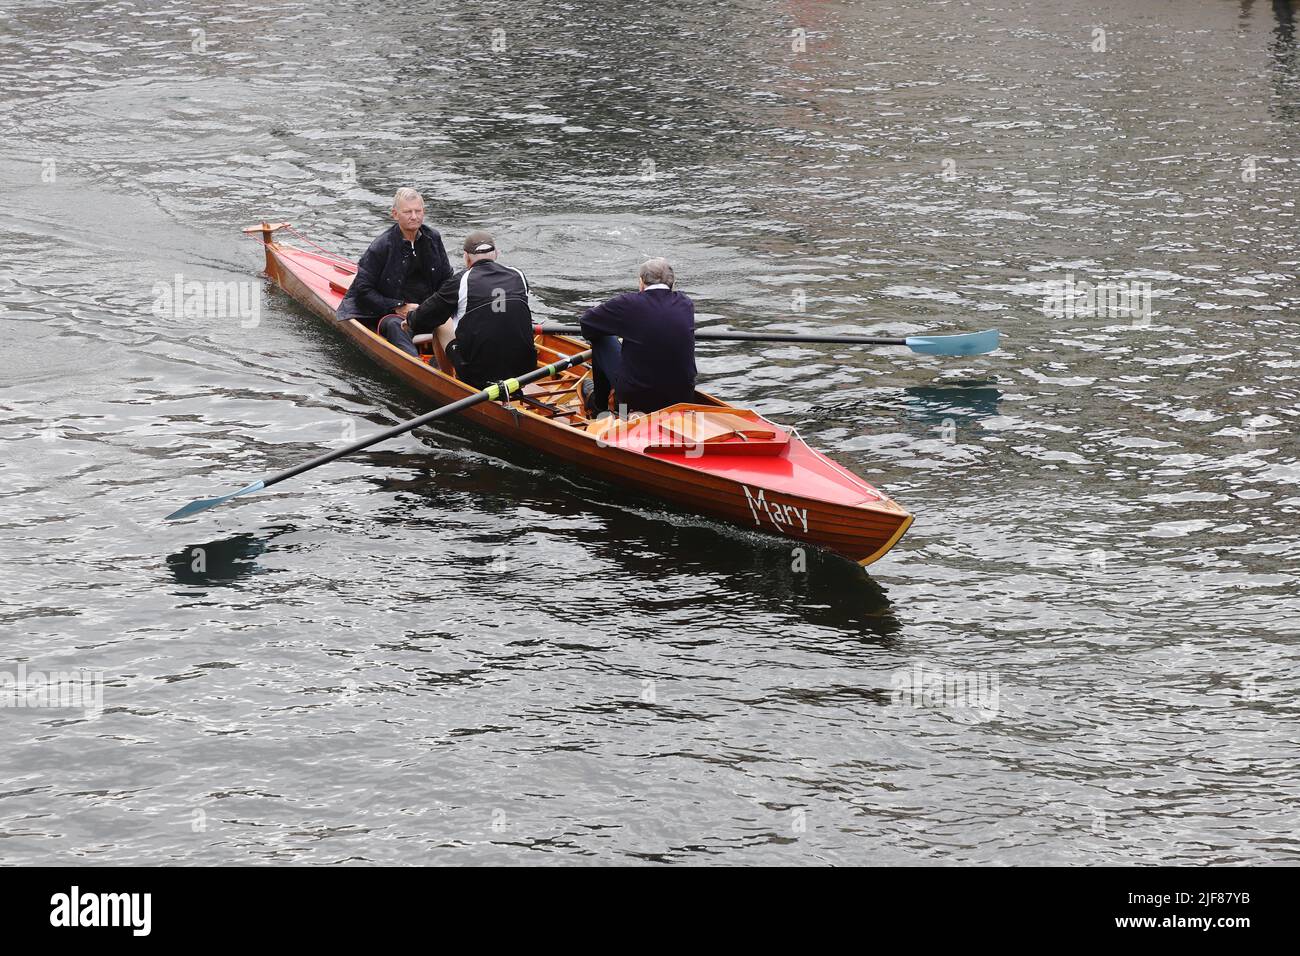 Copenhagen, Denmark - June 14, 2022: Three men in a rowing boat using the canal for excerice. Stock Photo